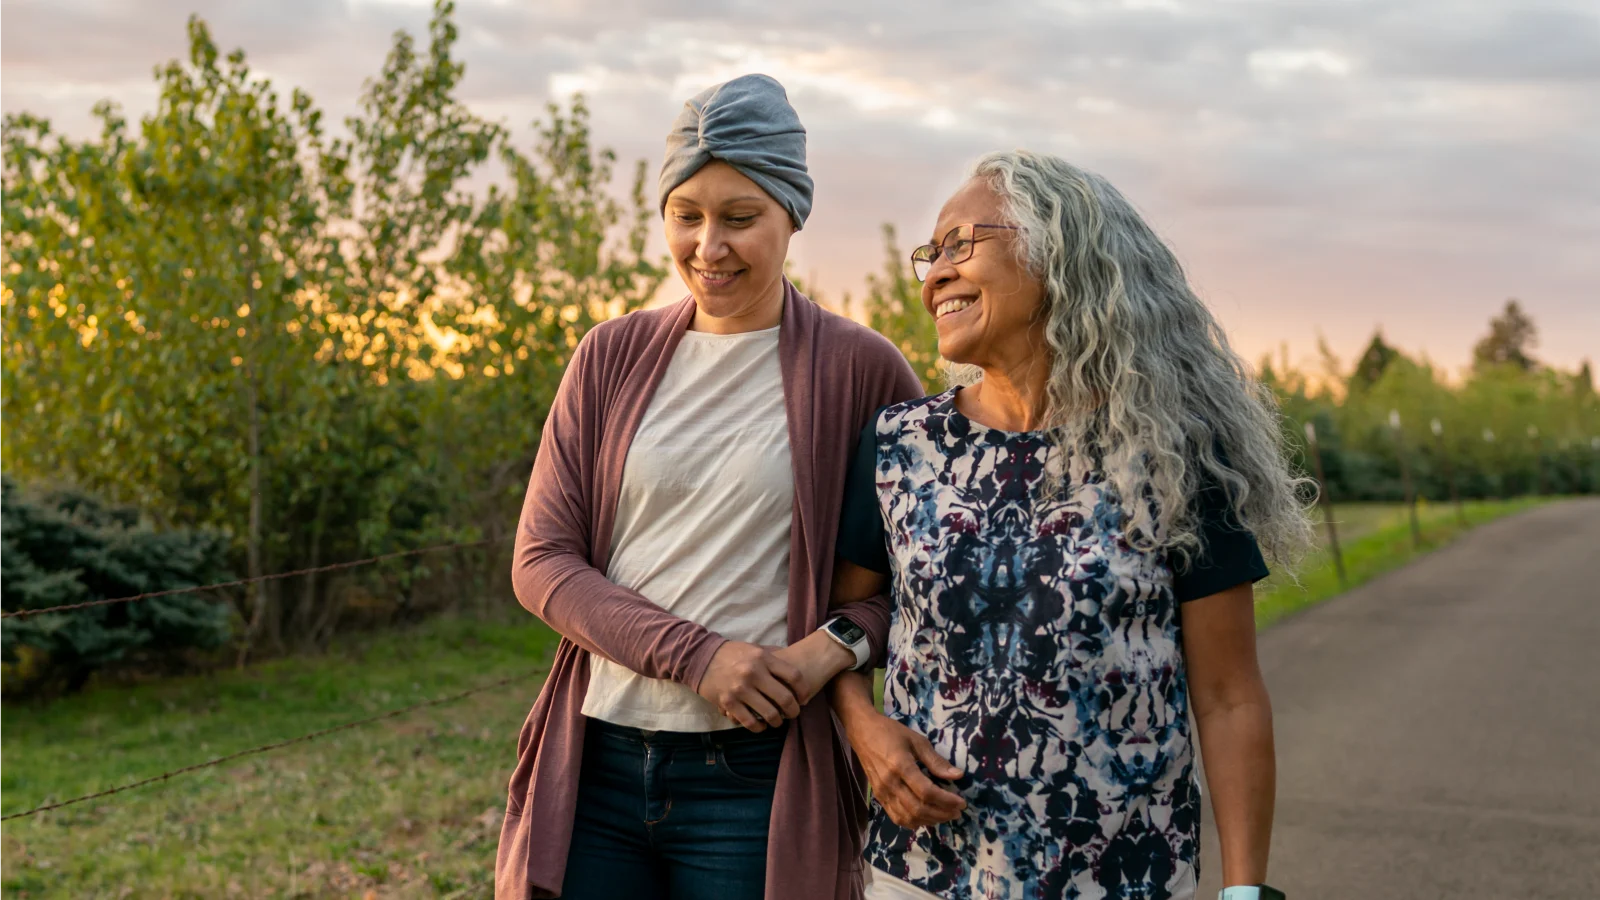 Standing Up and Stepping In: A modern look at caregivers in the US - Two women, one who's undergoing cancer treatment, walking together with linked arms. 